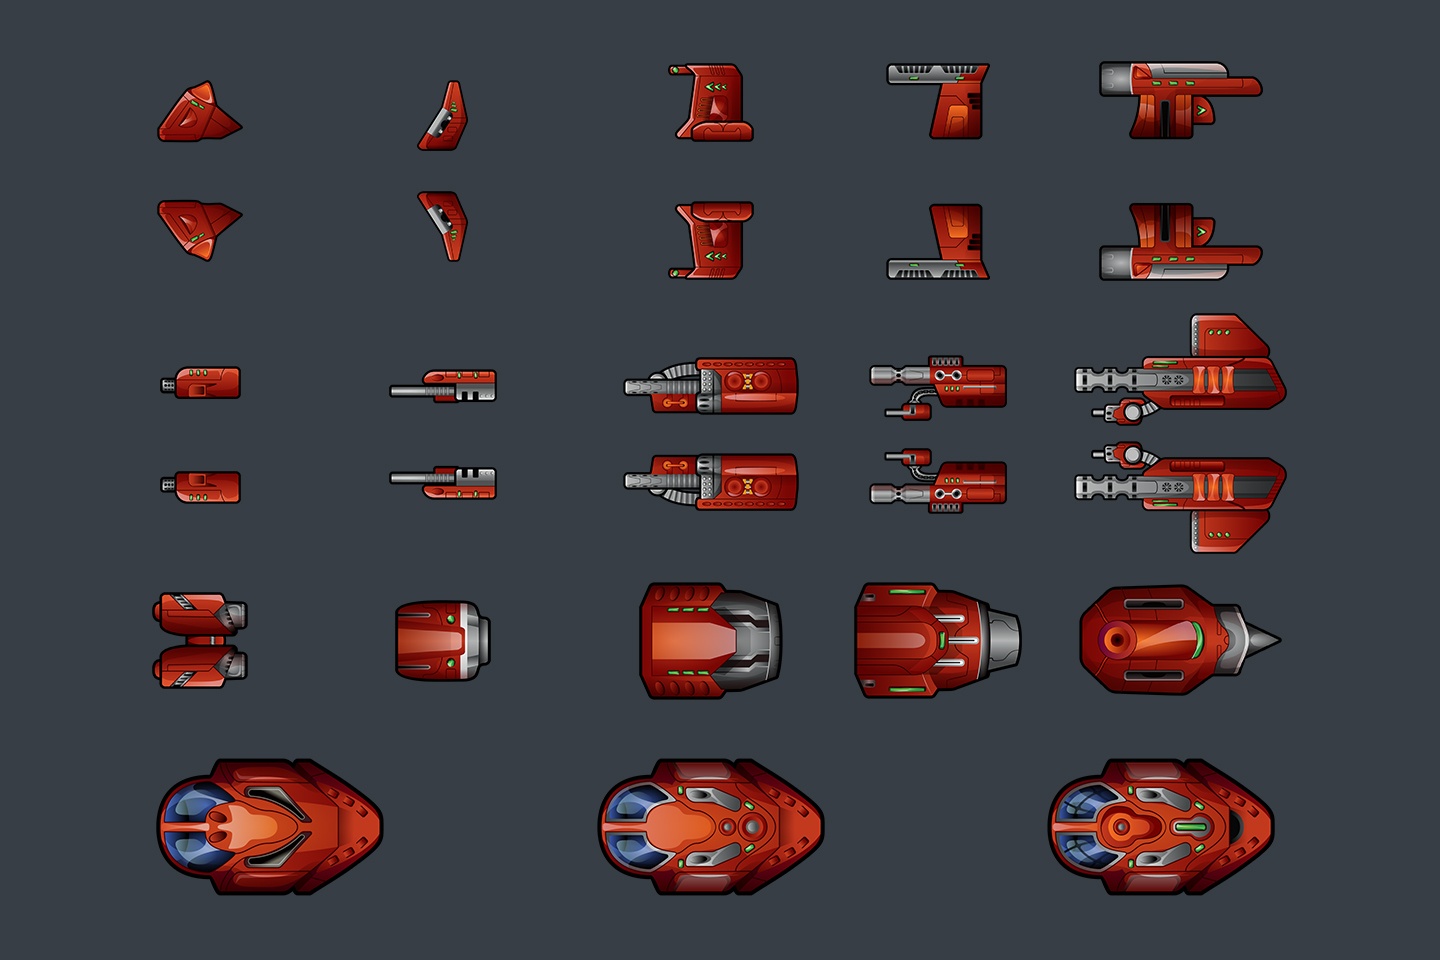 Spaceship 2d Sprites Pixel Art By Free Game Assets Gui Sprite Images